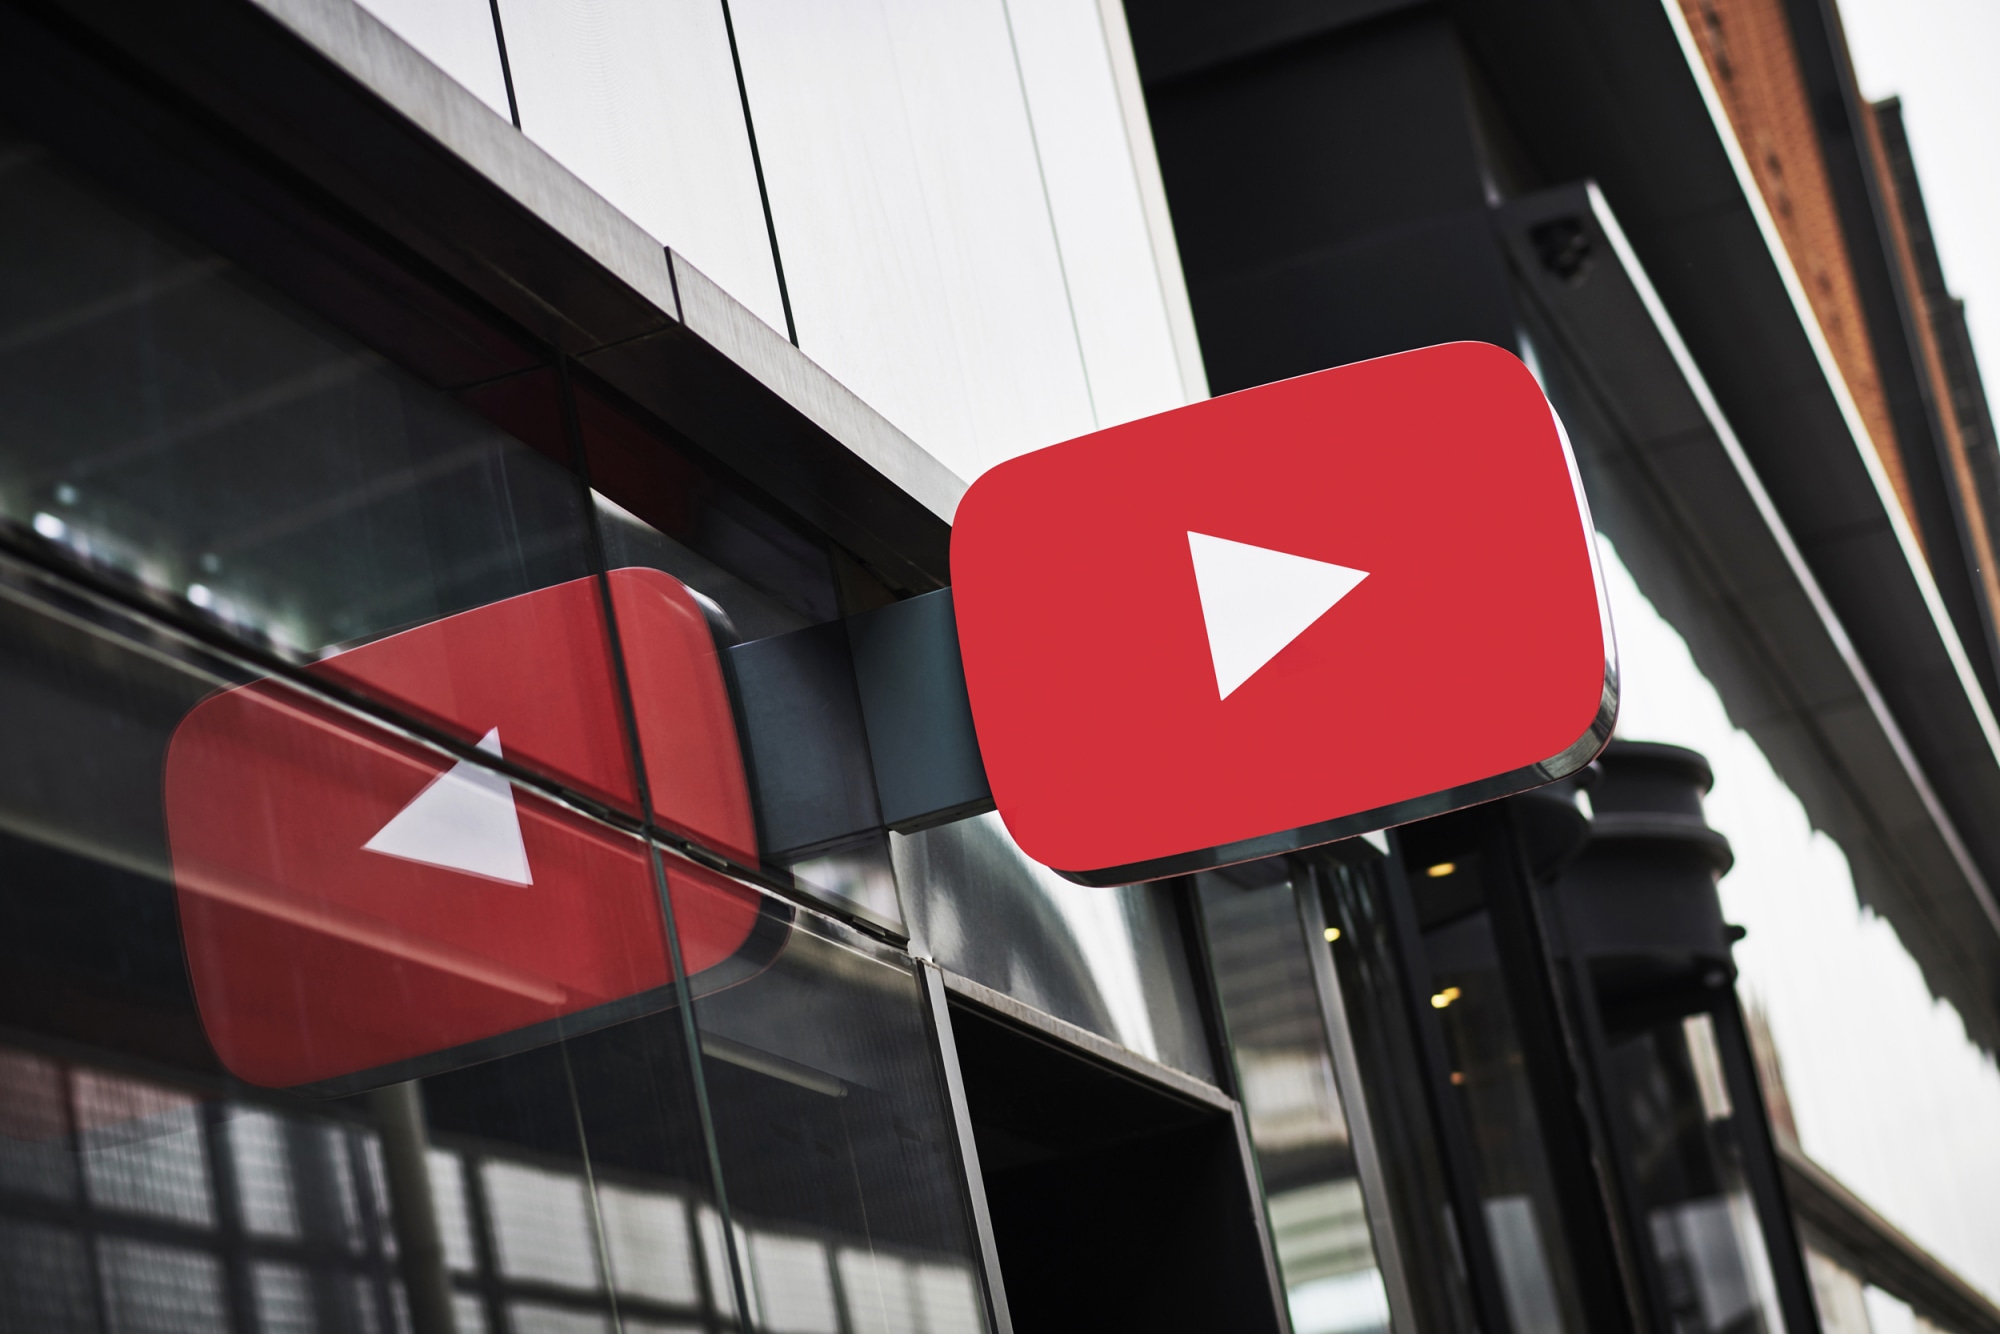 YouTube is developing a rival to TikTok